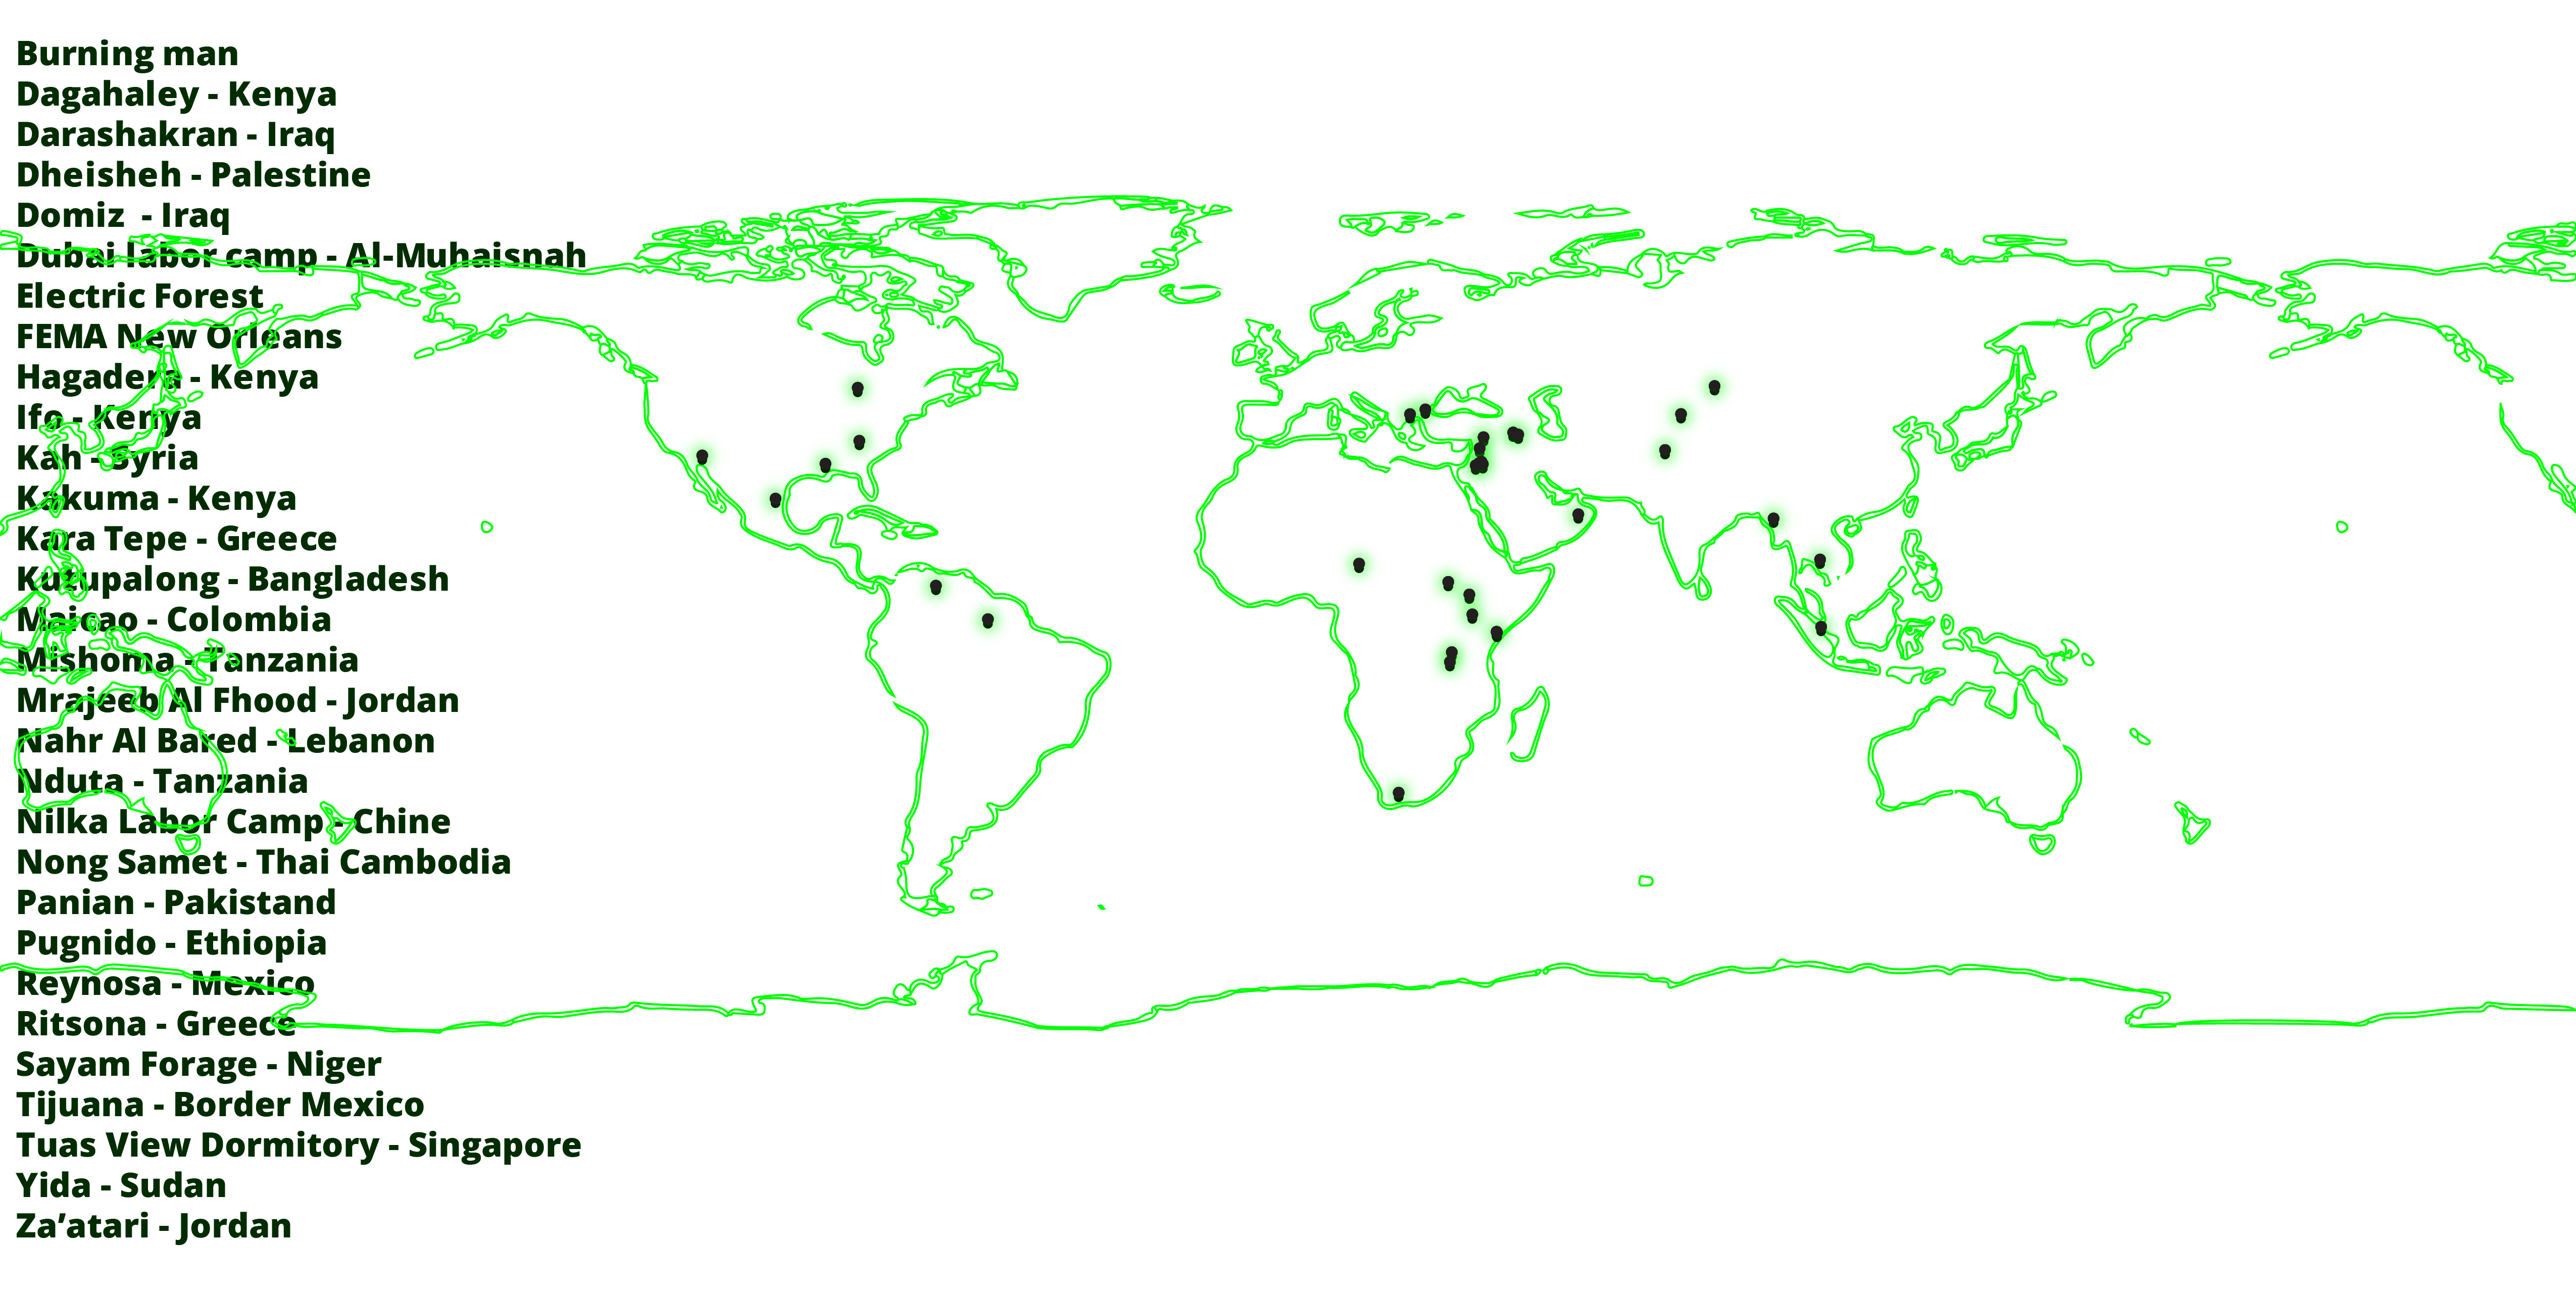 Global Siting Map